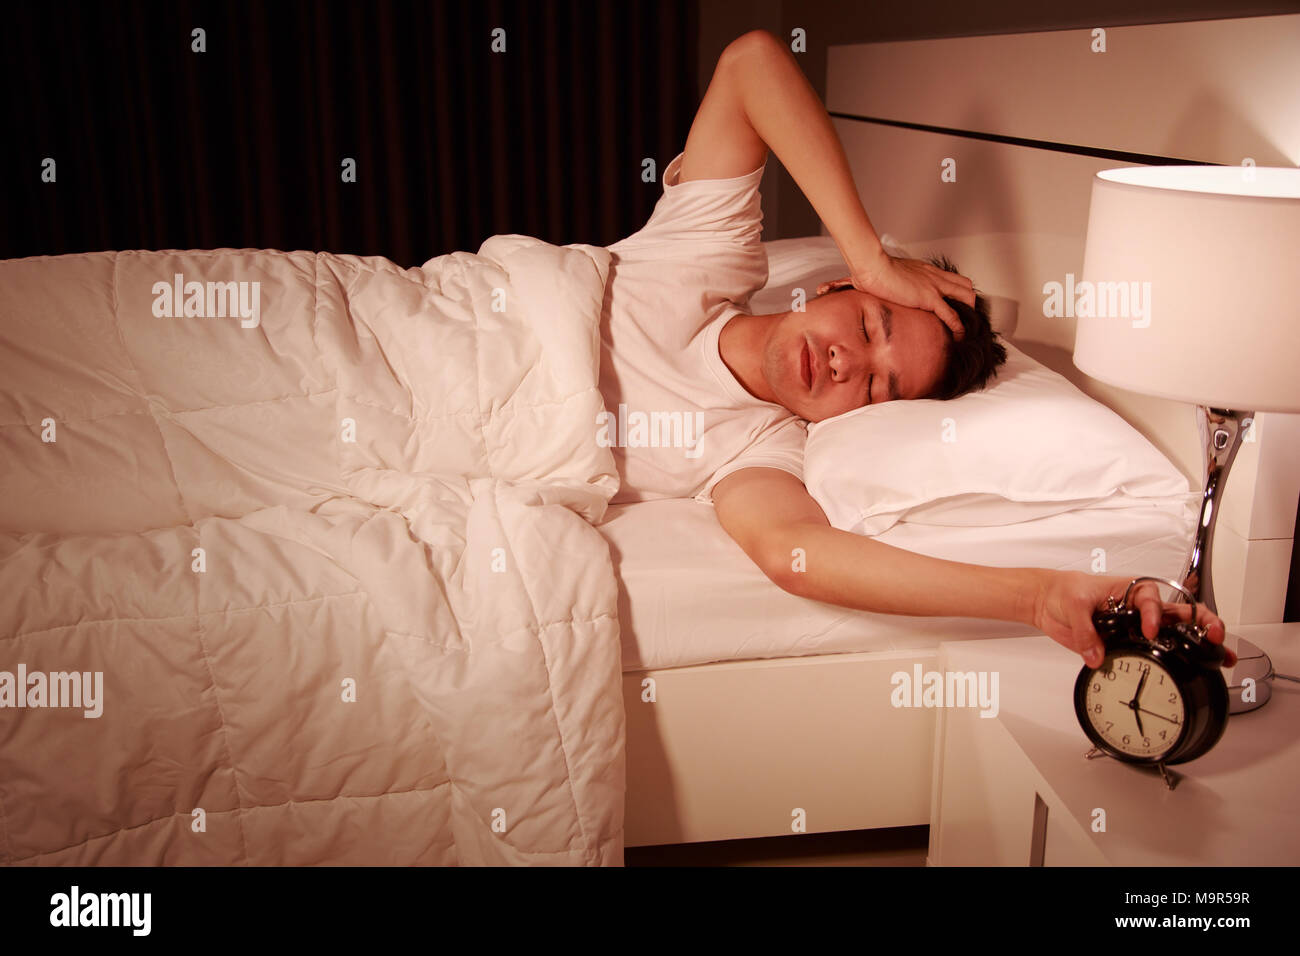 unhappy man being awakened by an alarm clock in his bedroom in the morning Stock Photo